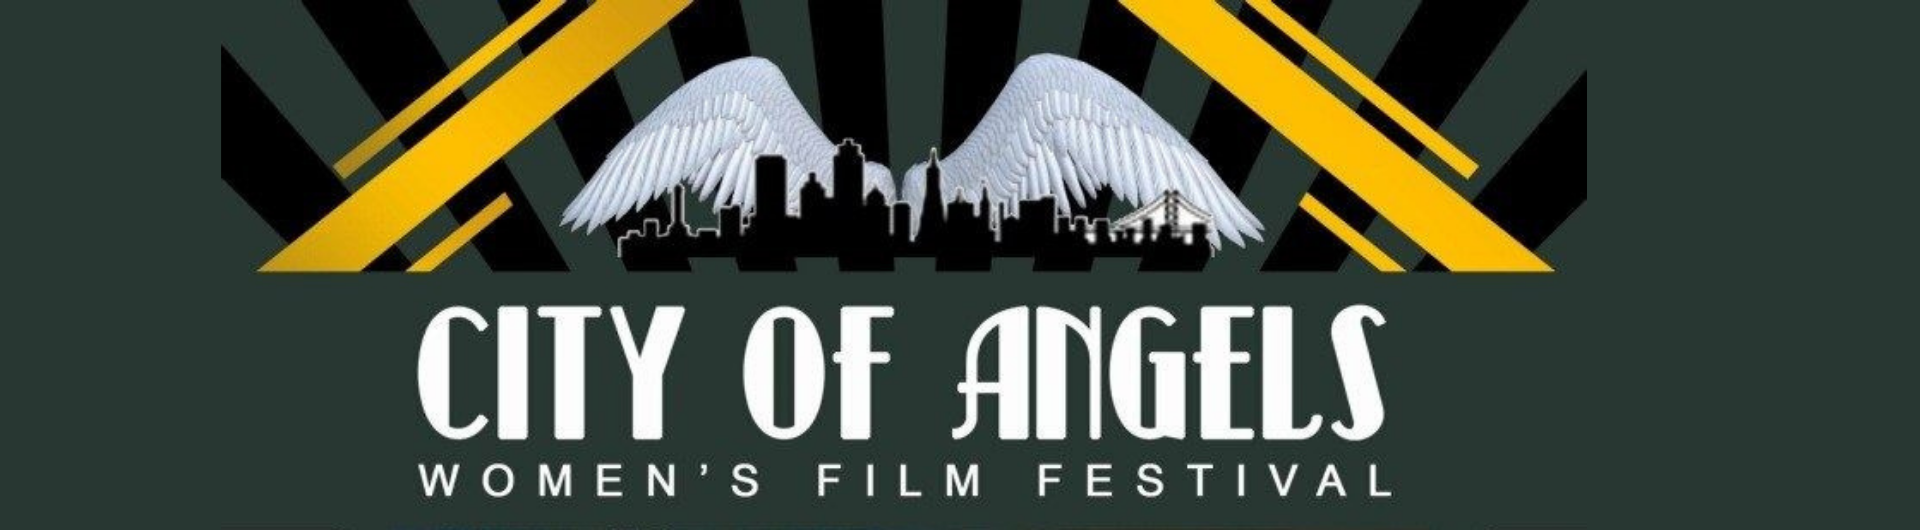 FEA Banner_City of Angels